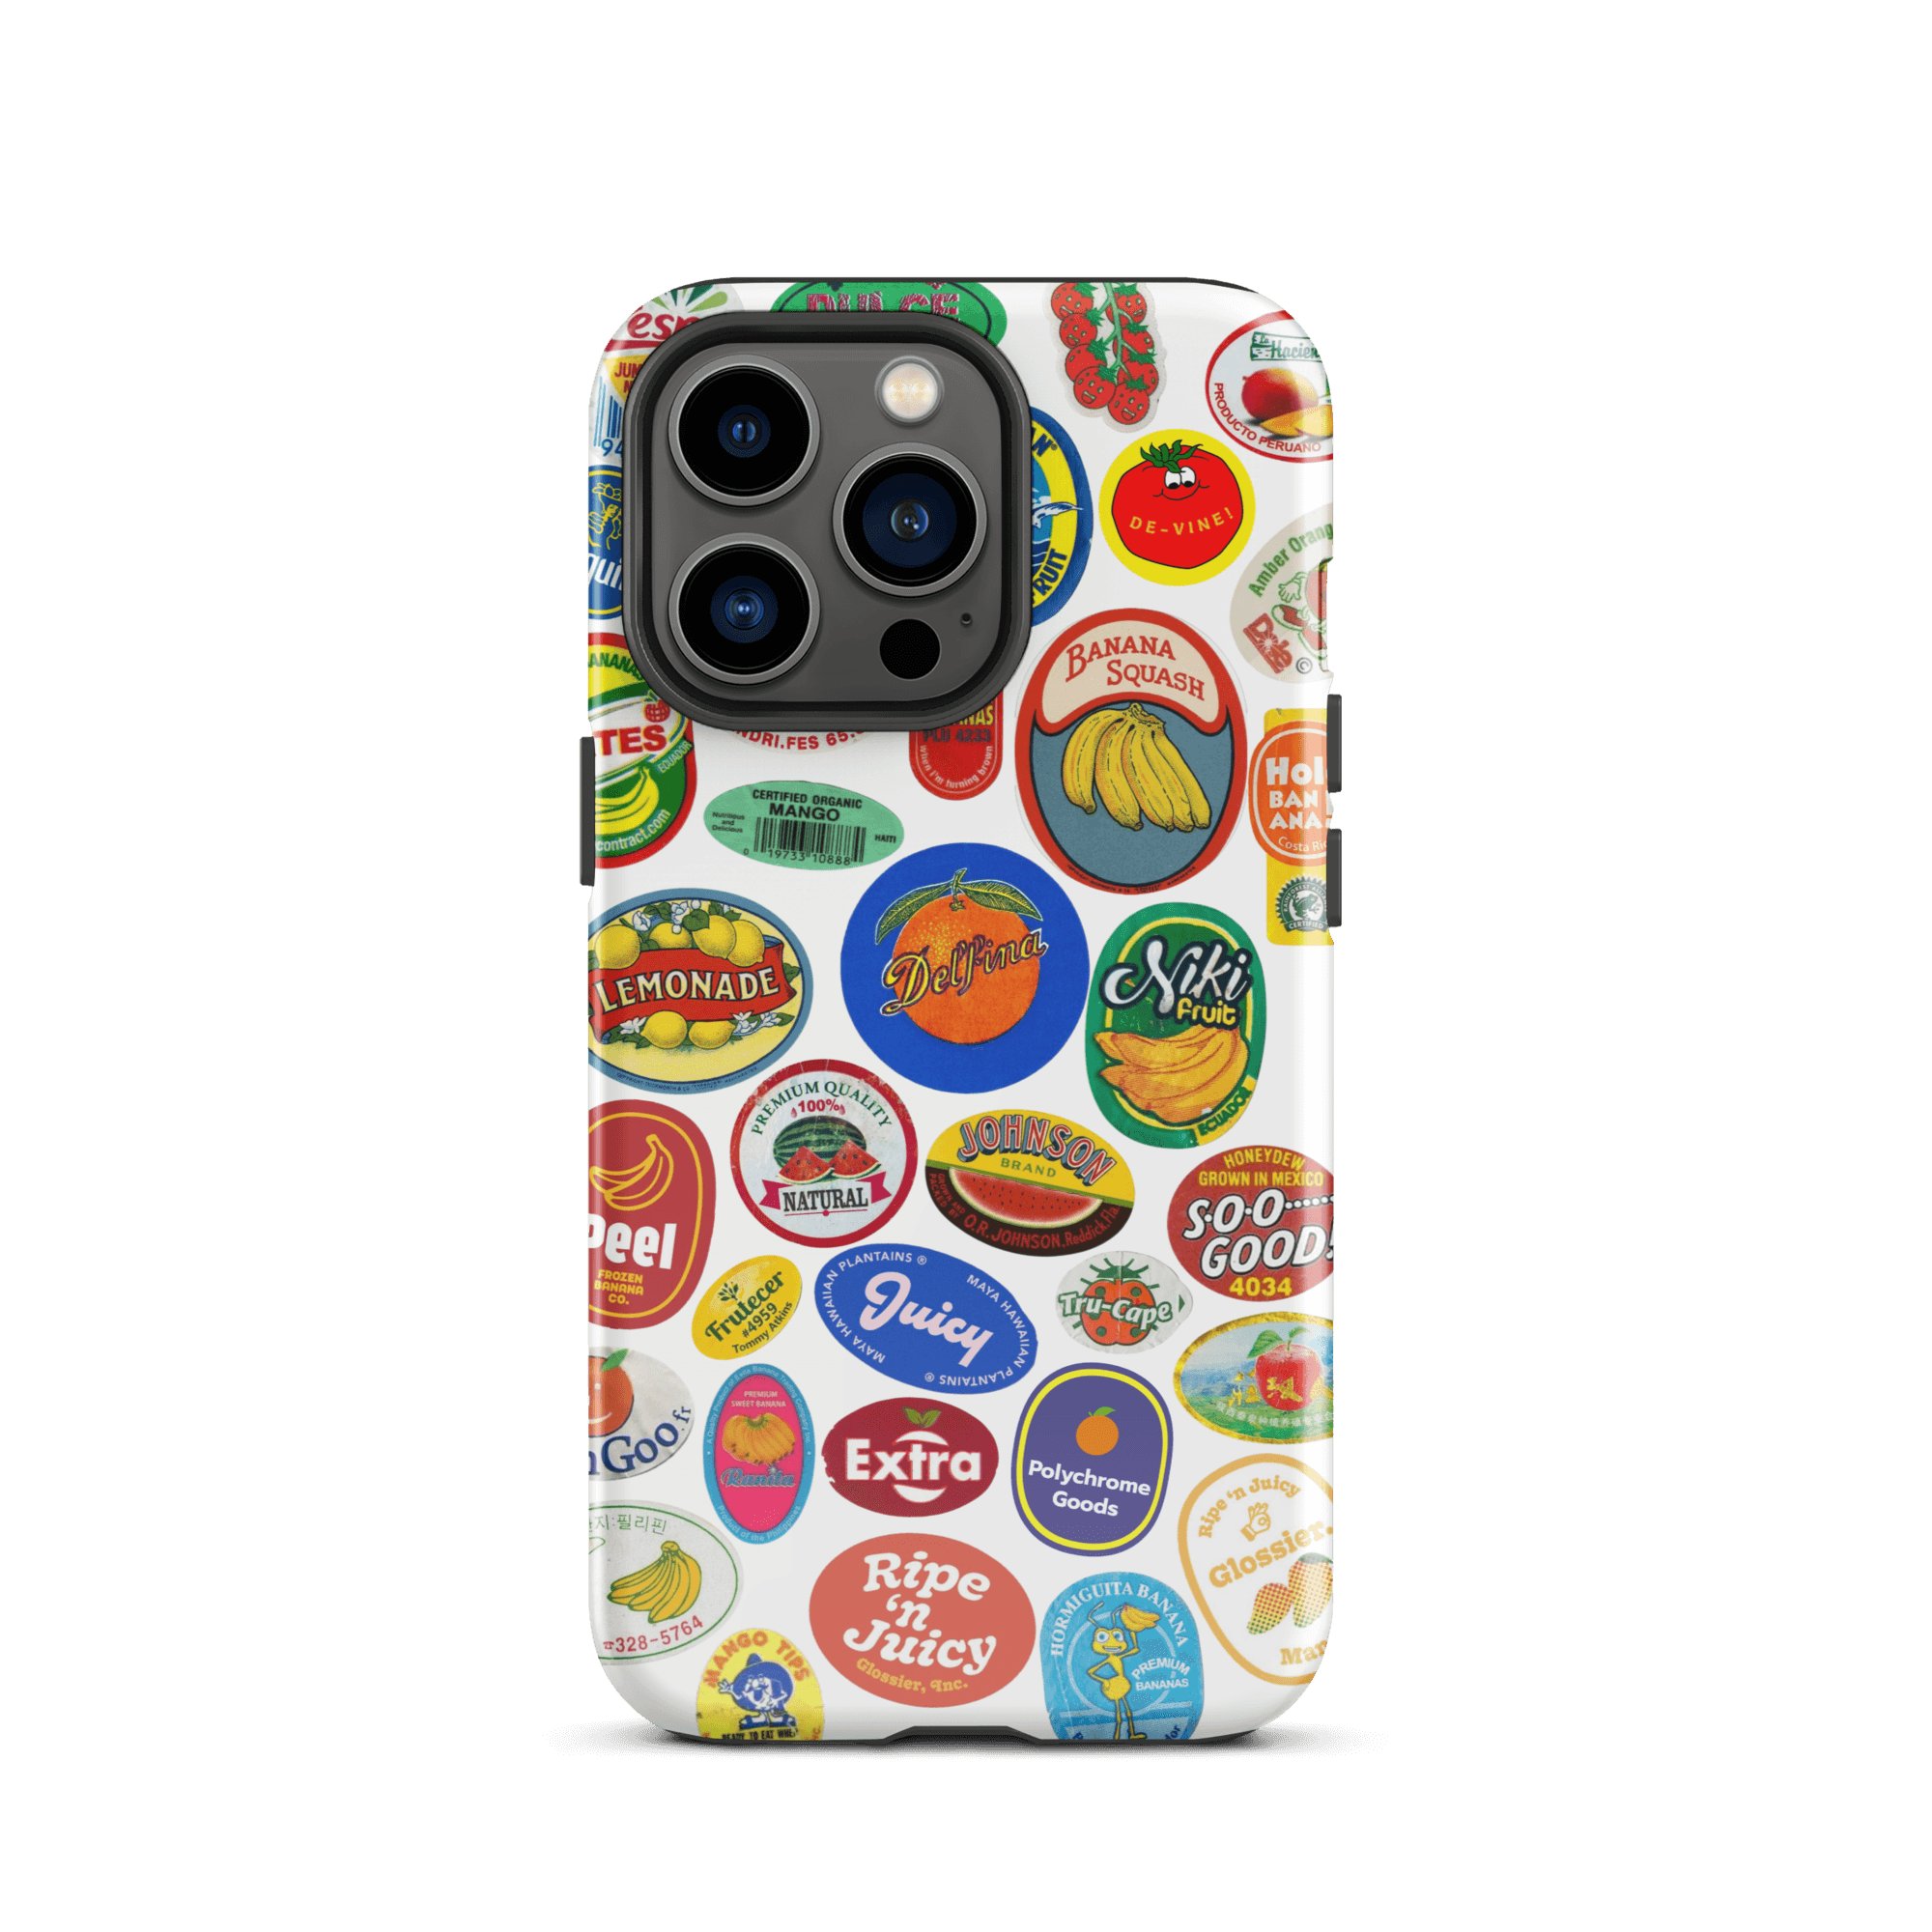 Fruit Stickers 🍊🍒🍋🍍🍏 Phone Case for iPhone (White Background) - Polychrome Goods 🍊